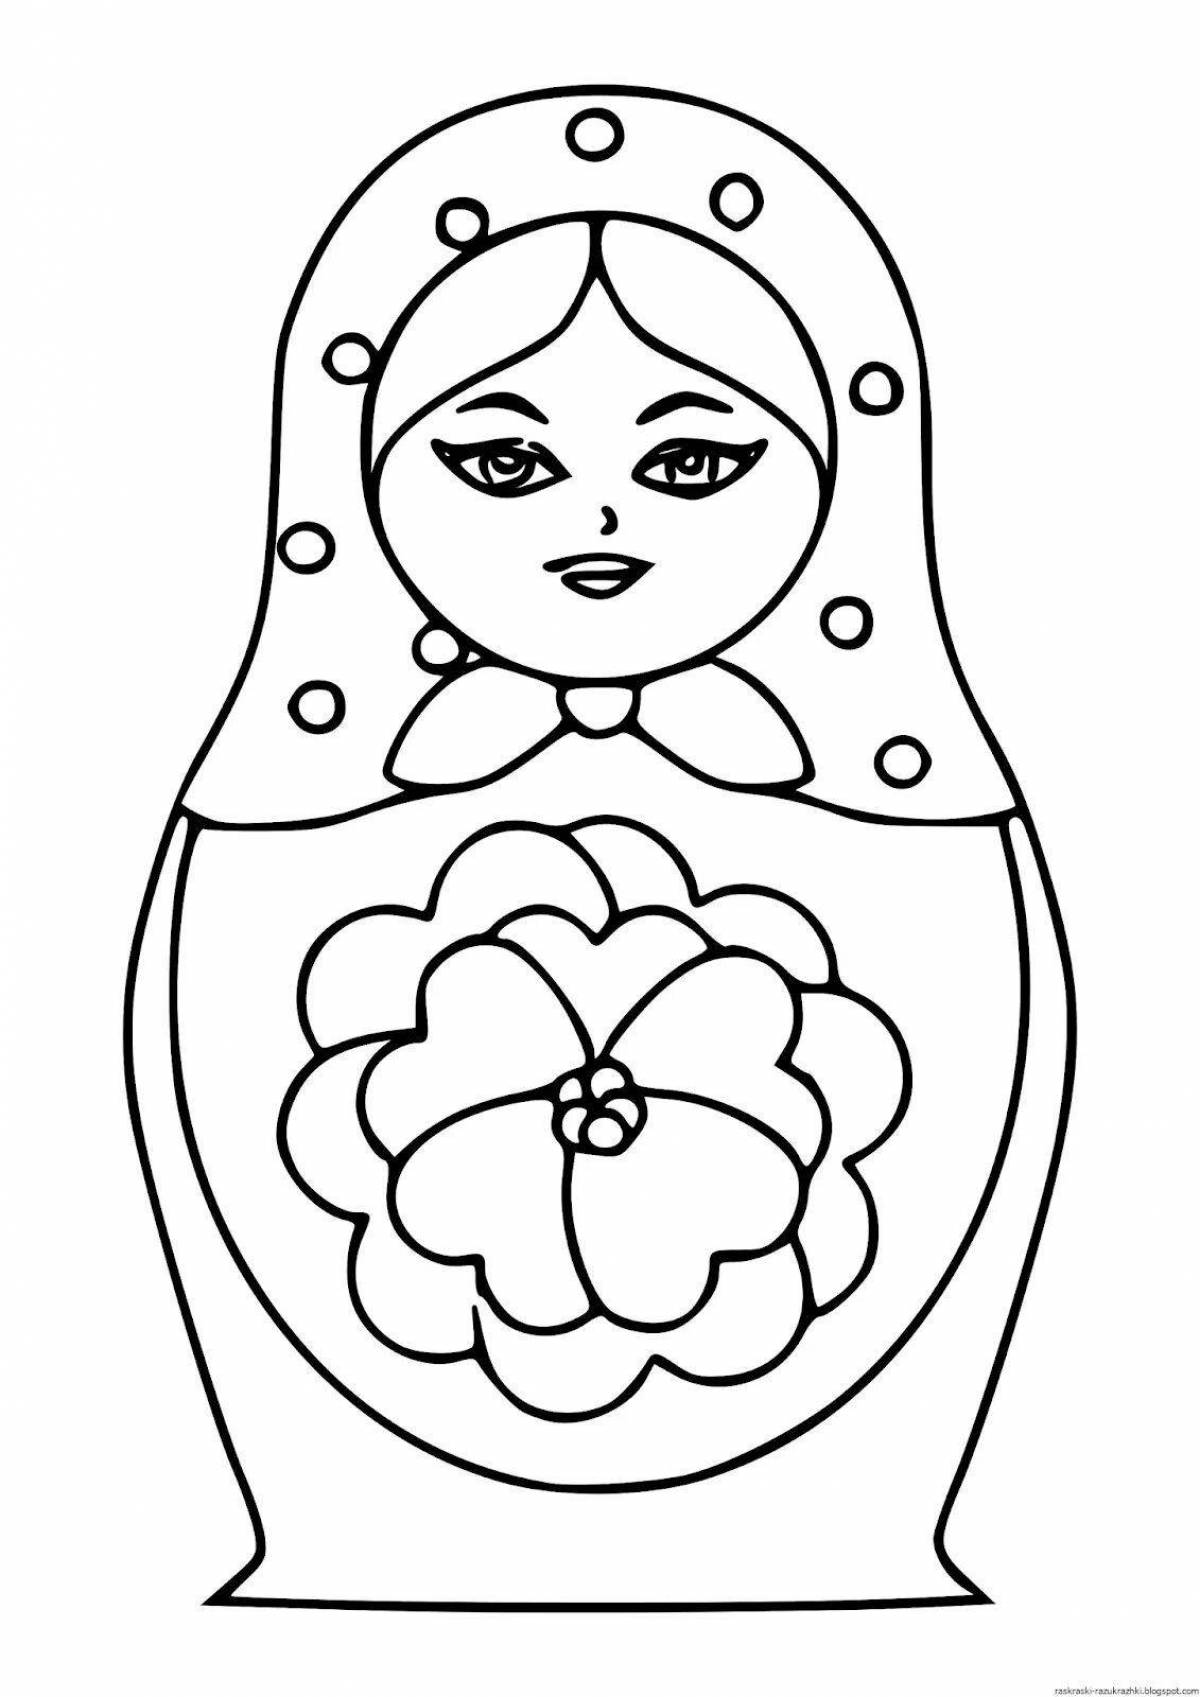 Funny nesting dolls coloring for kids